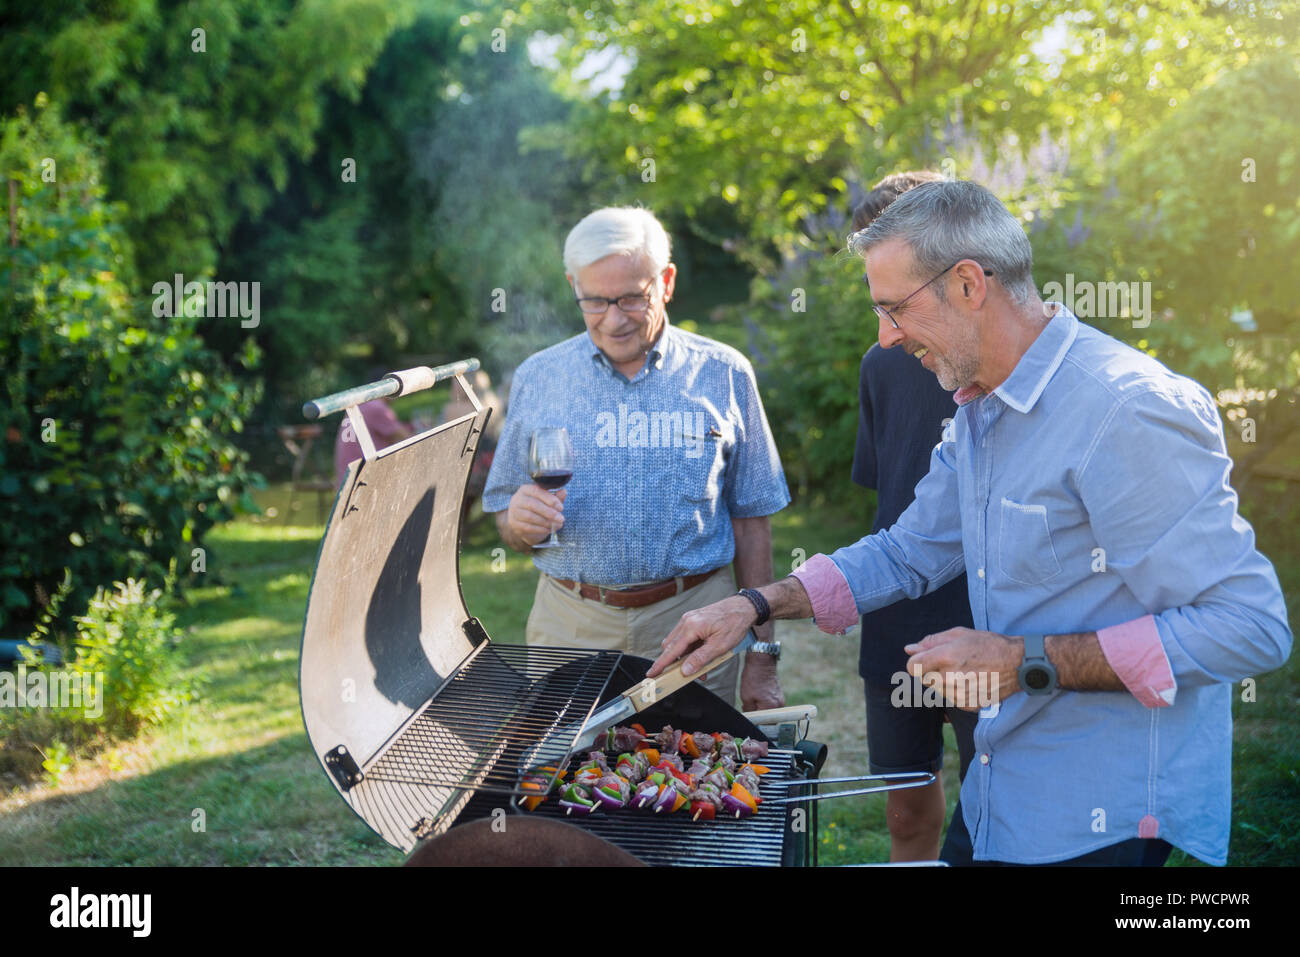 Family gathered for a bbq in the garden. men are grilling meat Stock Photo